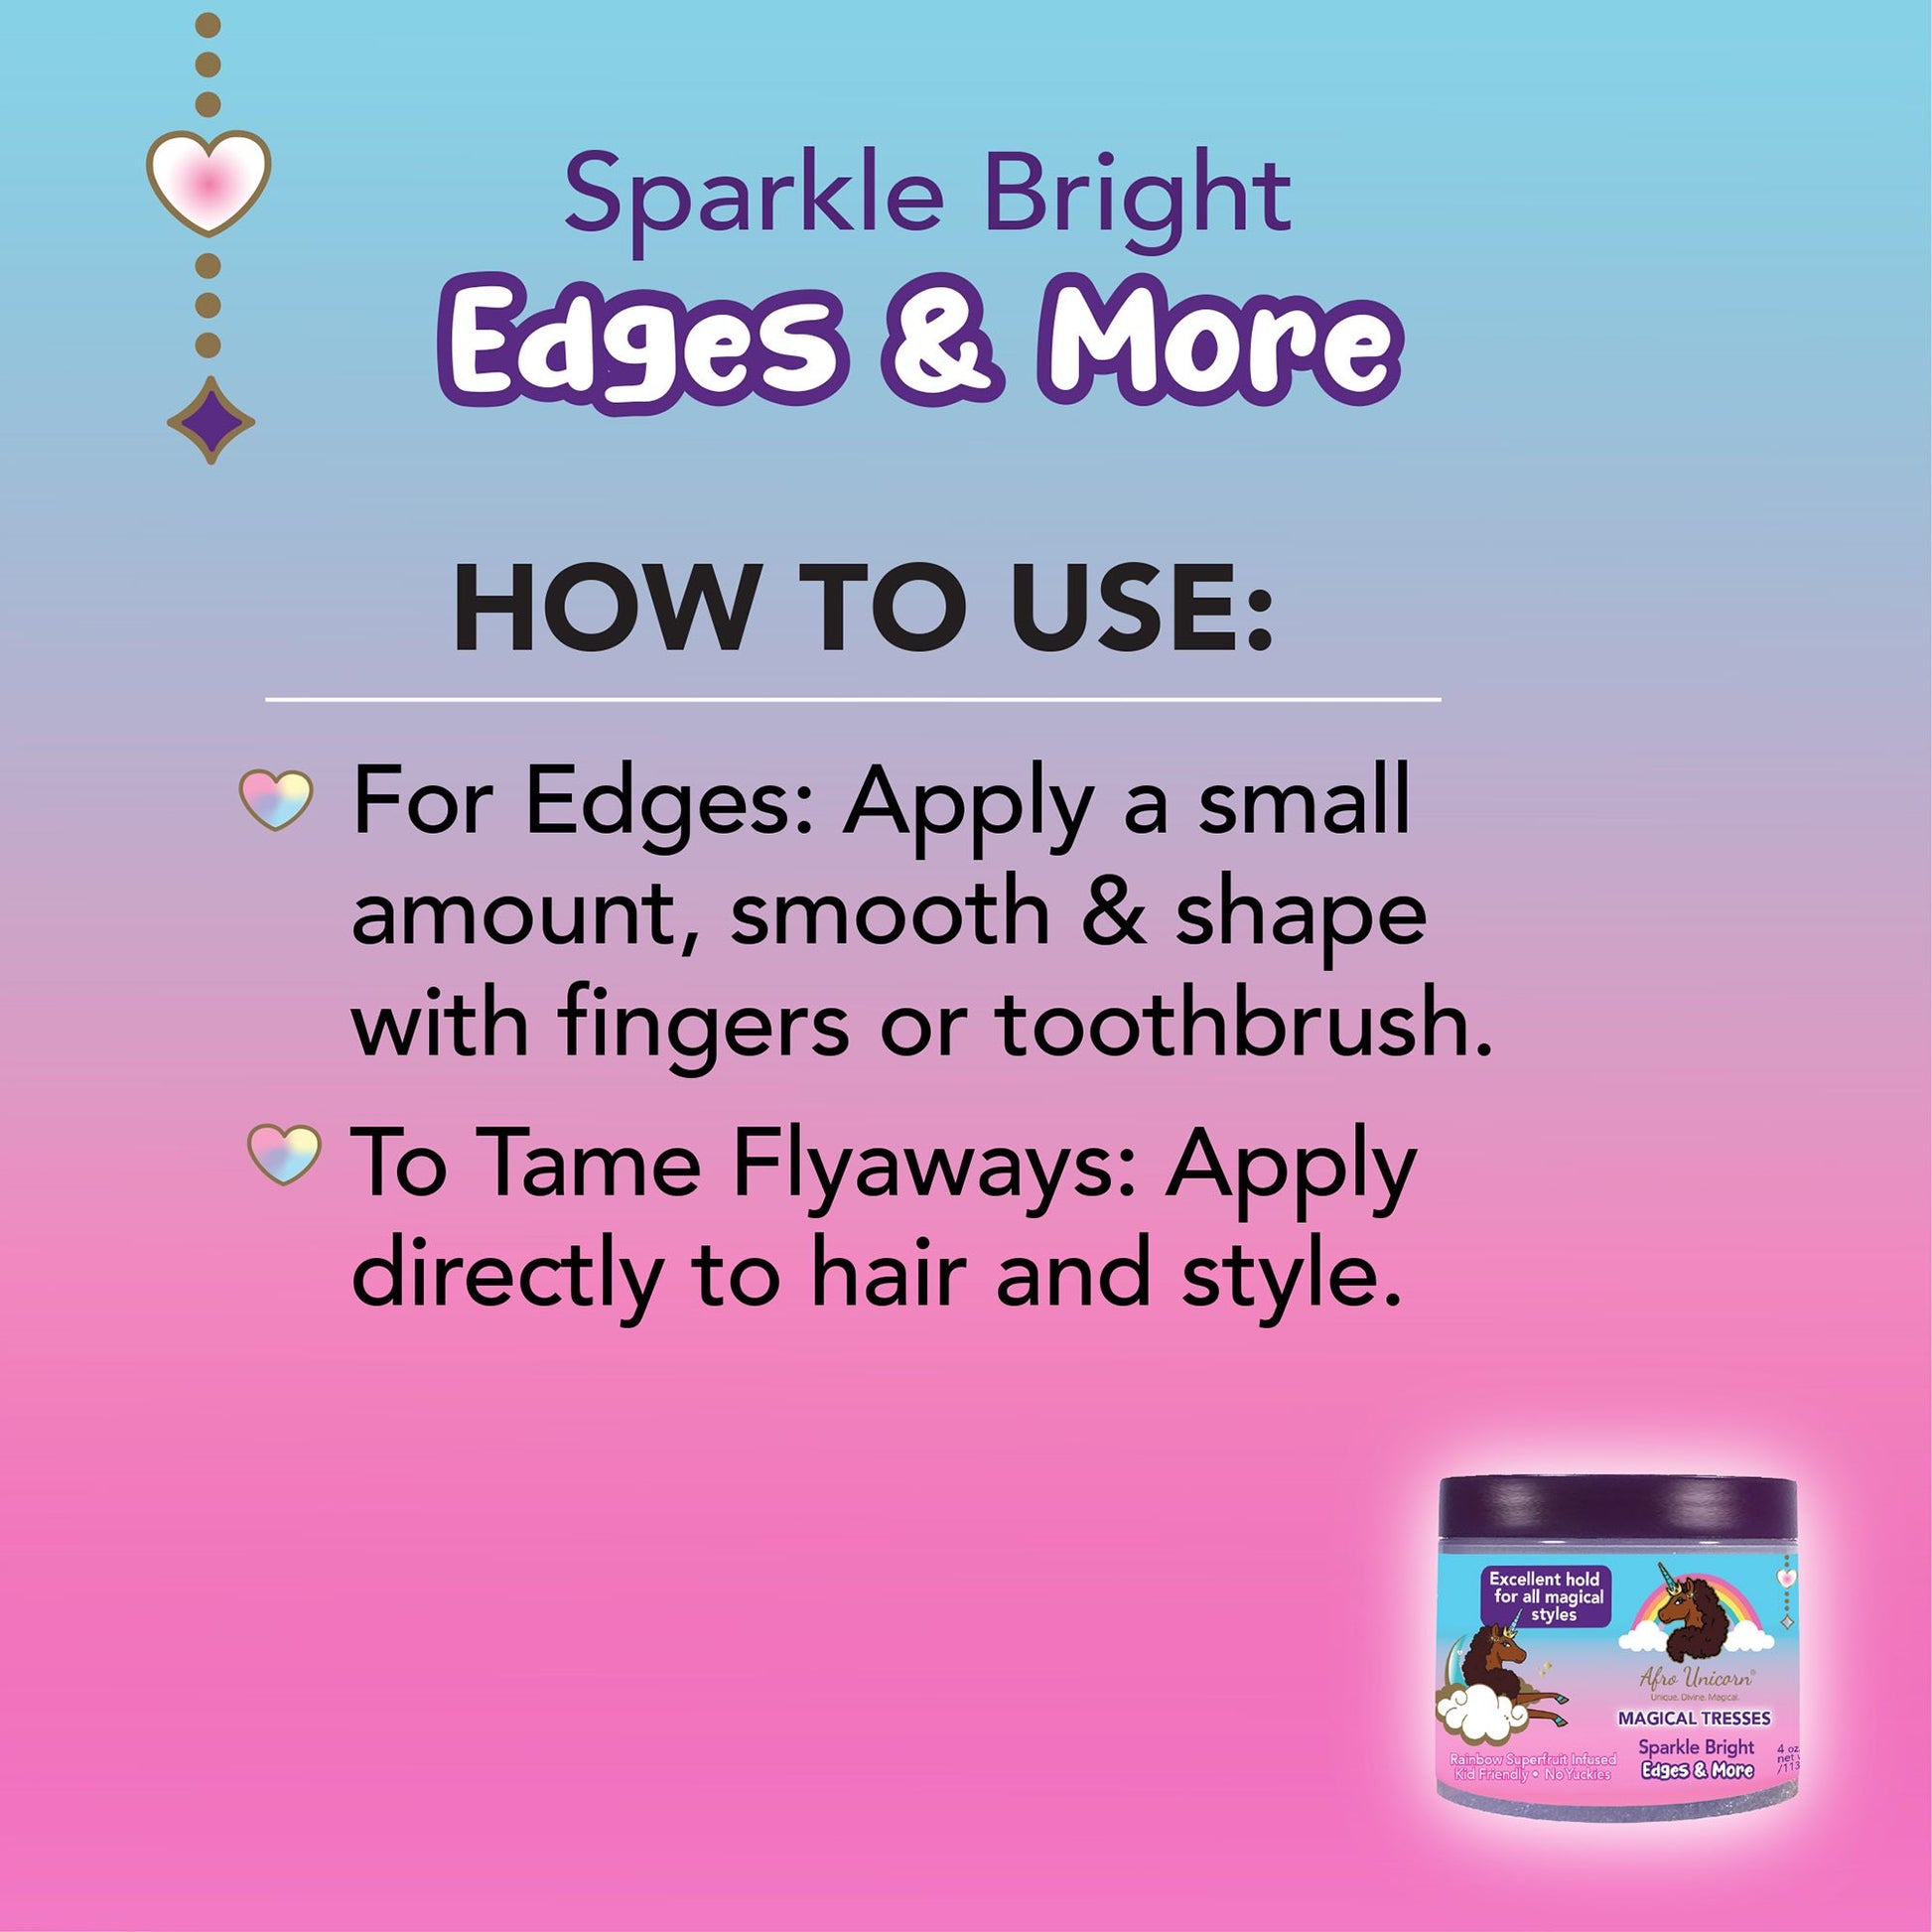 Afro Unicorn Sparkle Bright Edges & More how to use label.